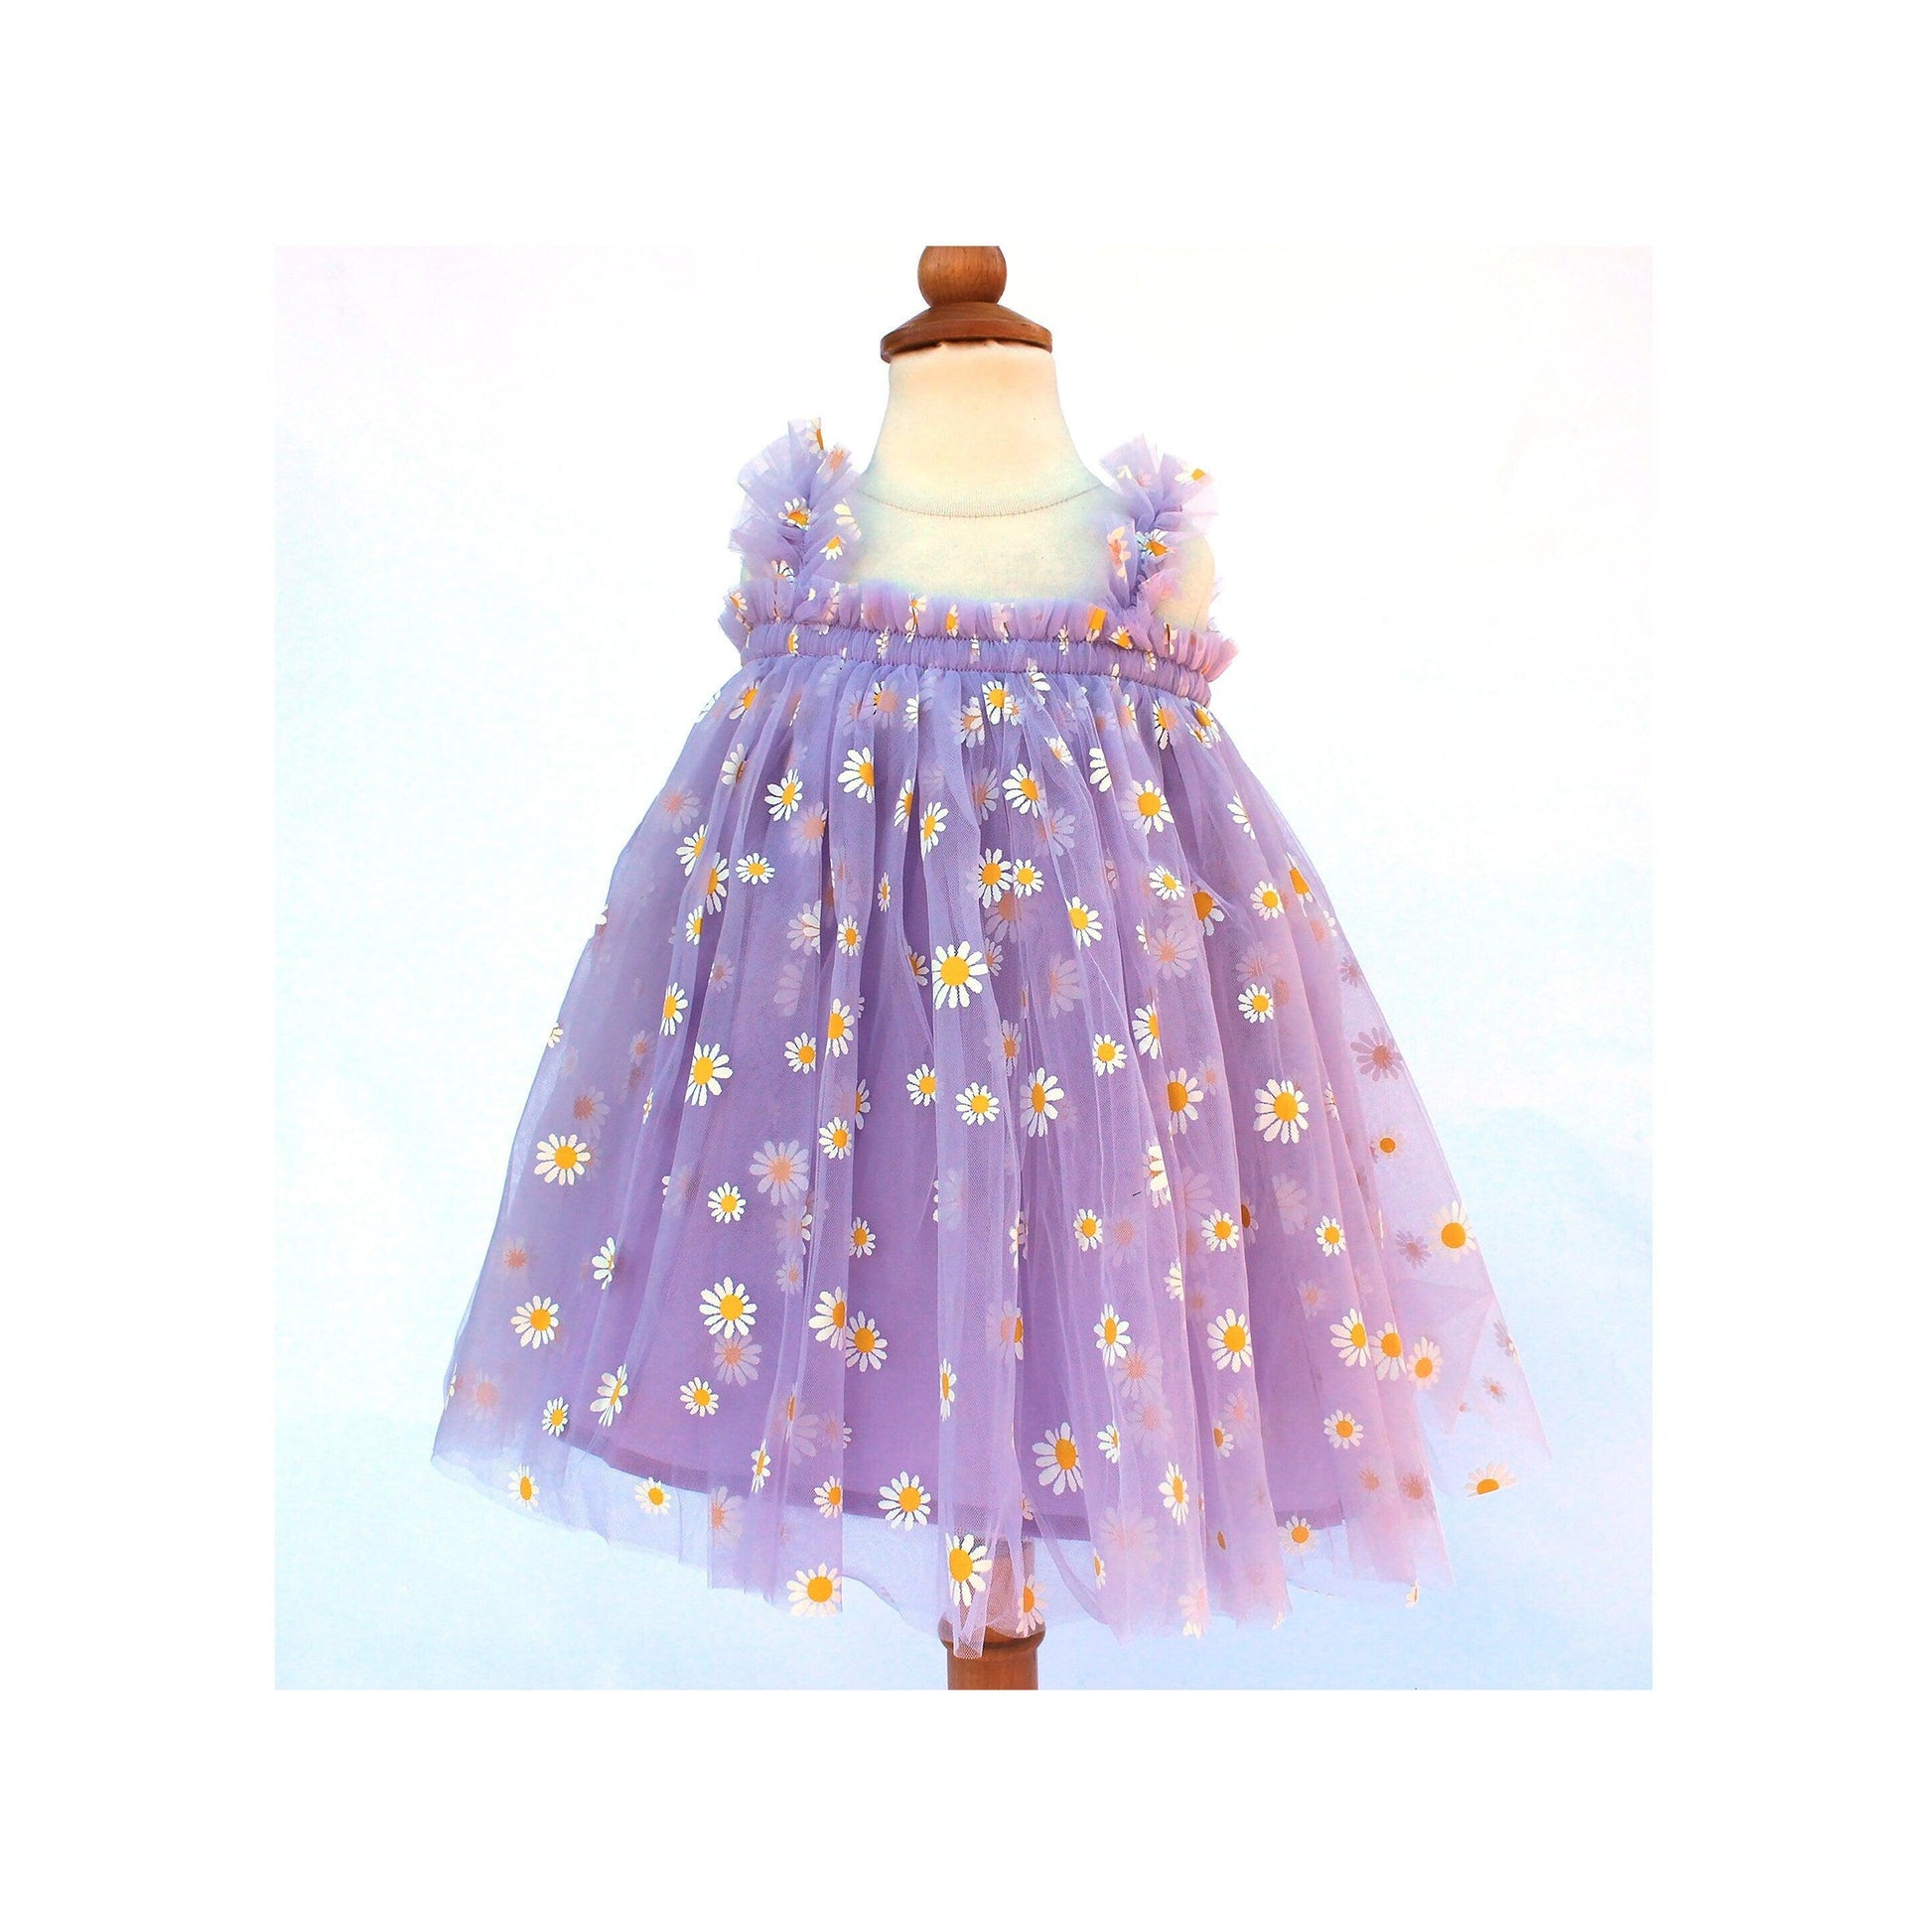 Baby Tulle Dress, Lavender Tulle Dress, Daisy Tutu Dress, Princess Out